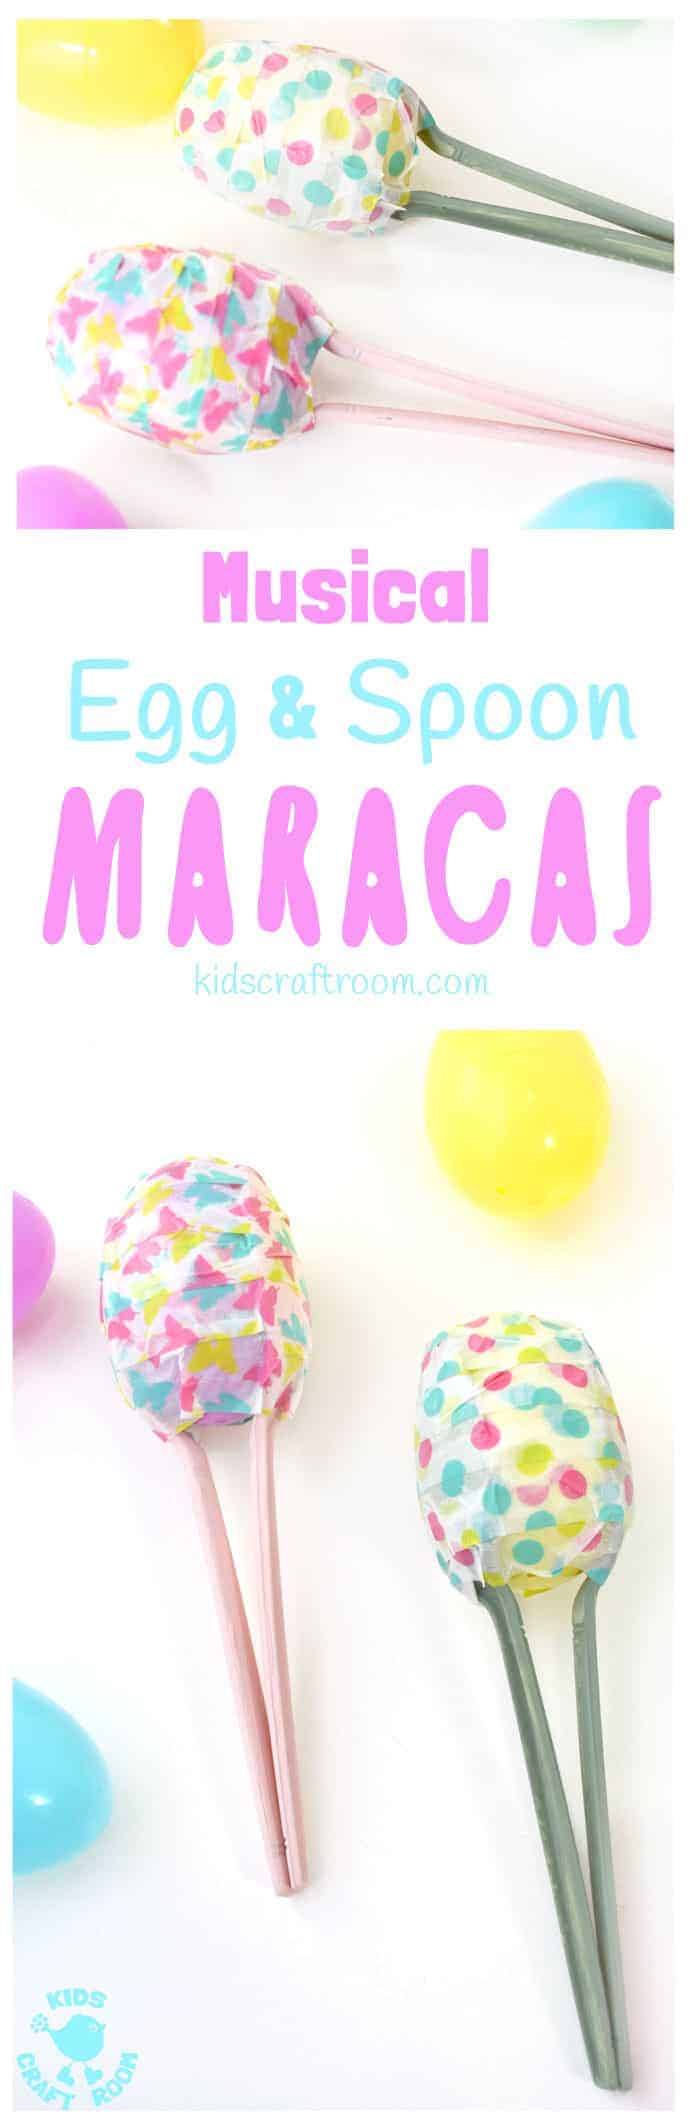 EASY AND FUN EASTER EGG MARACAS - Kids will love learning how to make egg shakers and making their own music! It's a simple Spring craft for all ages and a great way to encourage listening skills, music and movement! #easter #eastercrafts #maracas #eggshakers #shakers #eggmaracas #homemadeinstruments #music #musicforkids #diymaracas #kidscrafts #craftsforkids #kidscraftroom #easteractivities #springcrafts #springactivities 